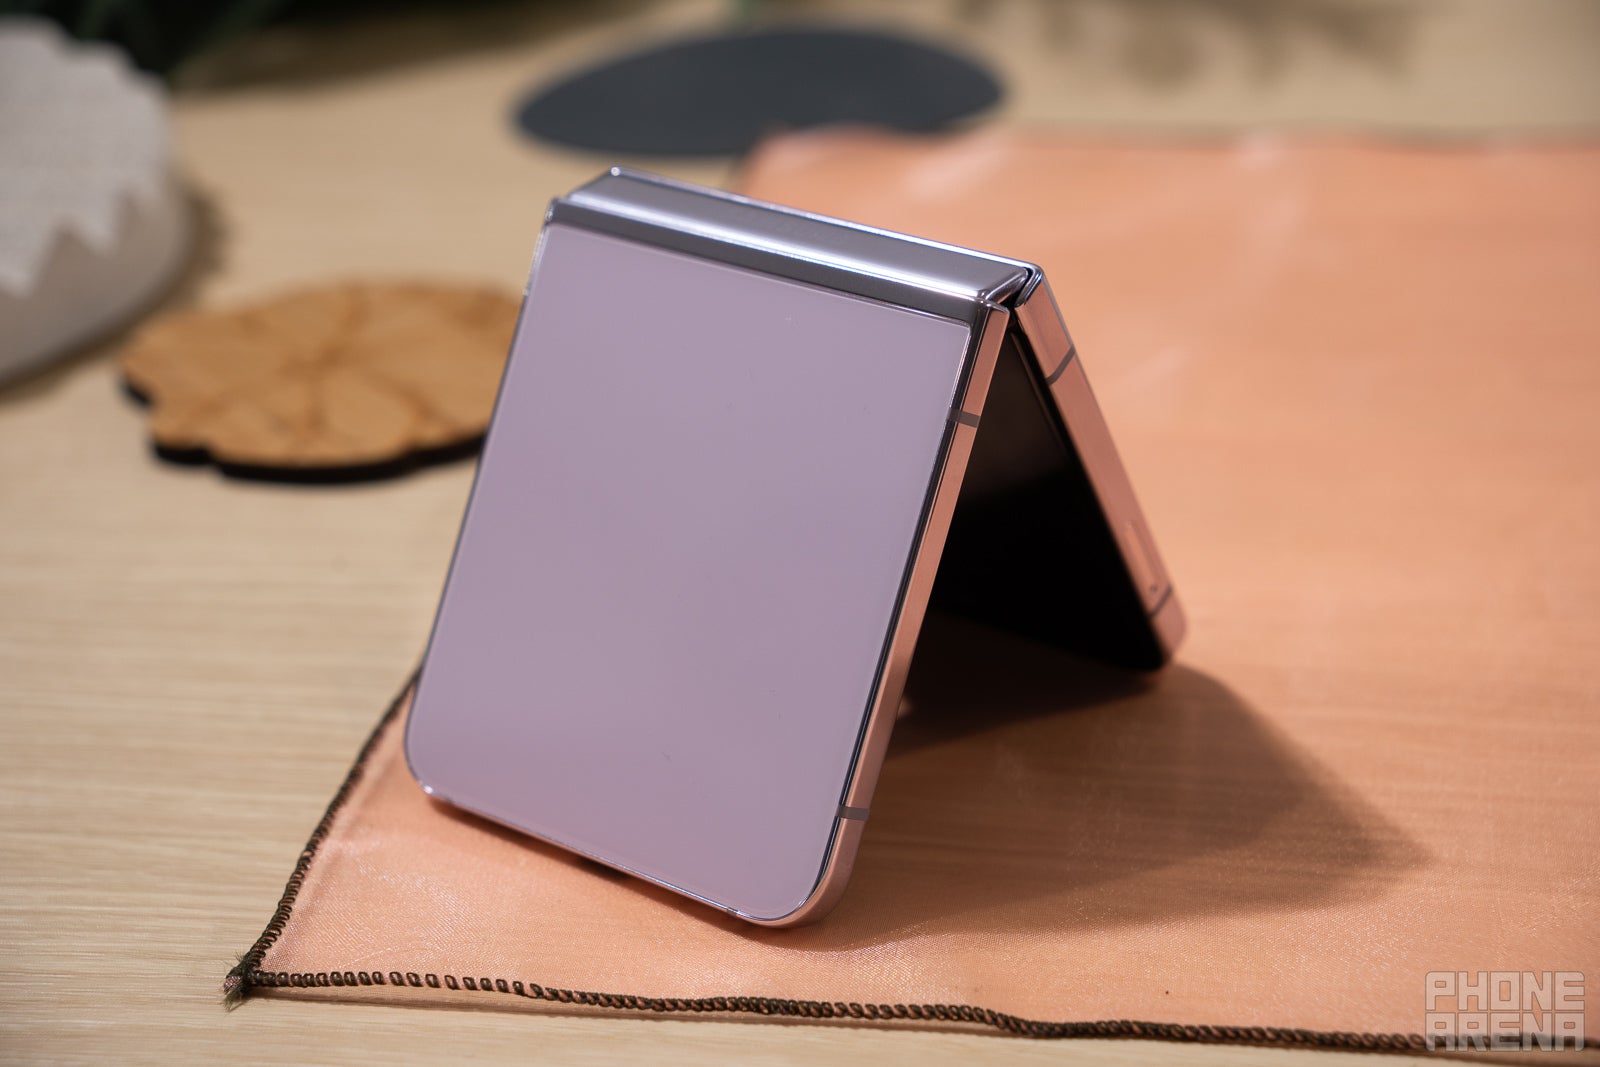 (Image Source - PhoneArena) The Z Flip 5 in Lavender - Galaxy Z Flip 5 colors: all the official hues